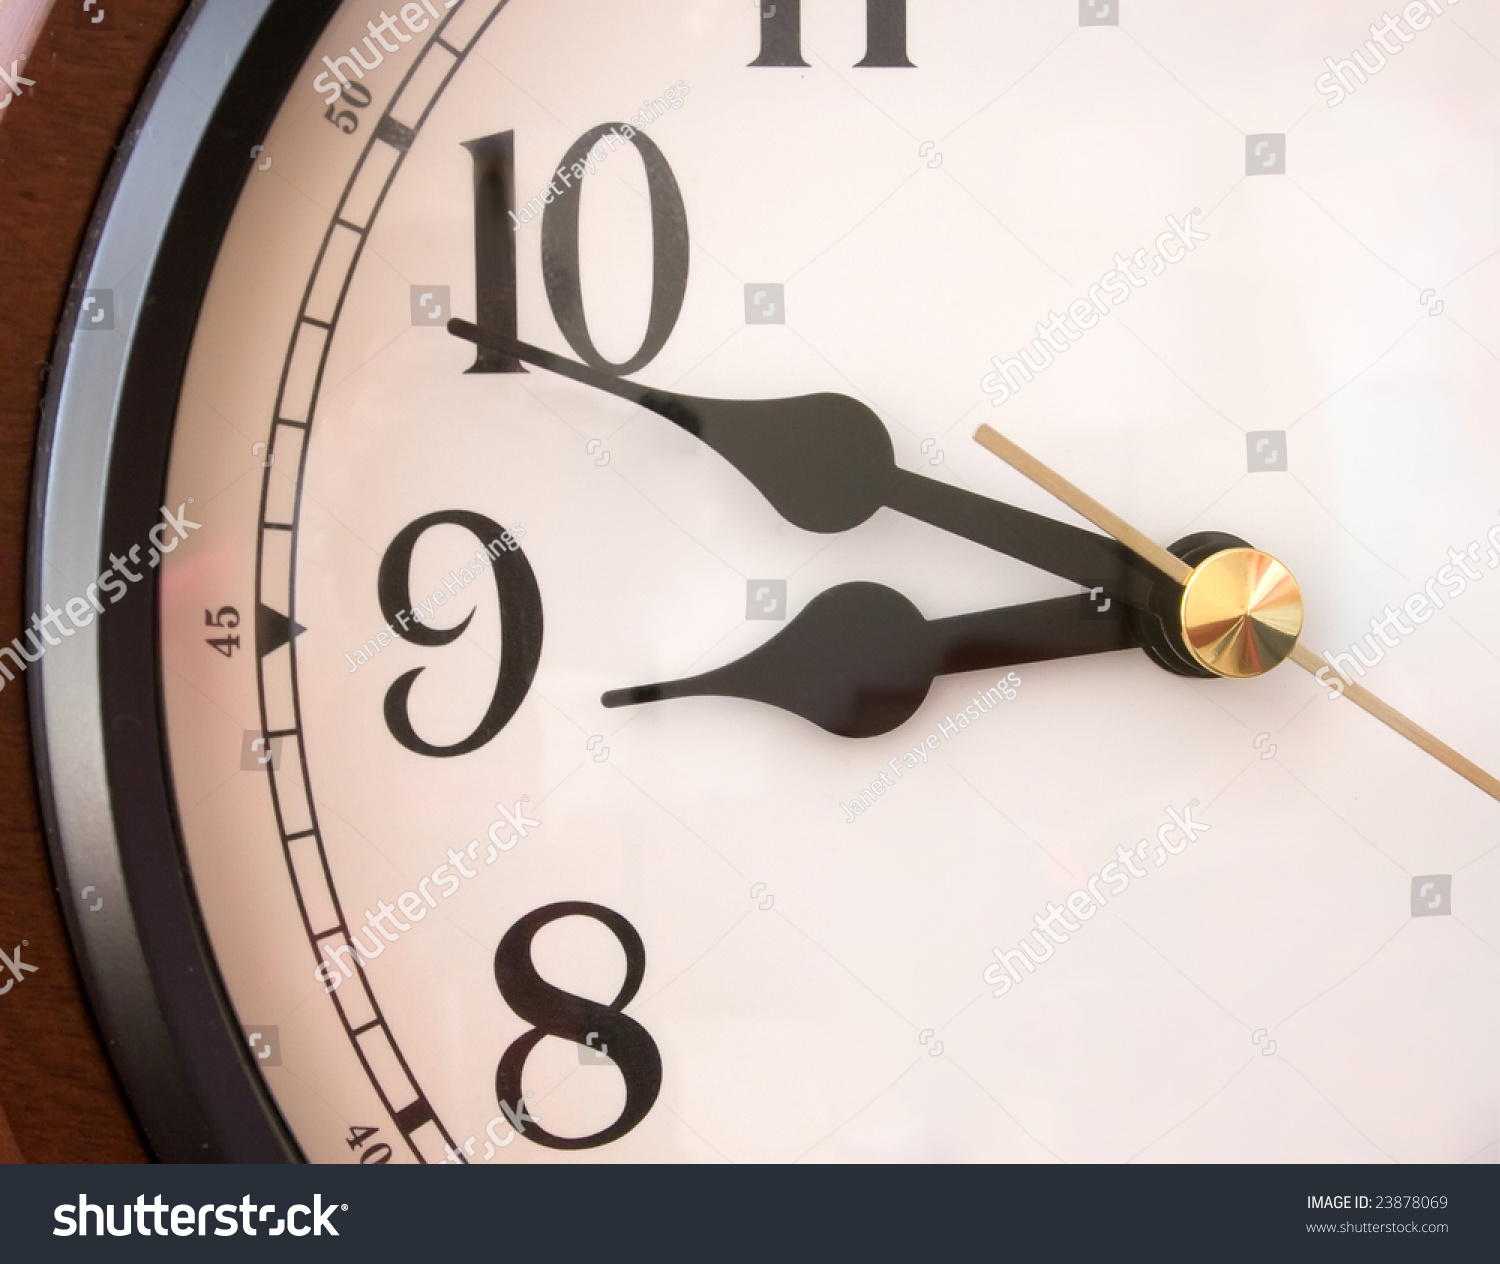 Close Clock Face Showing 10 Minutes Miscellaneous Stock Image